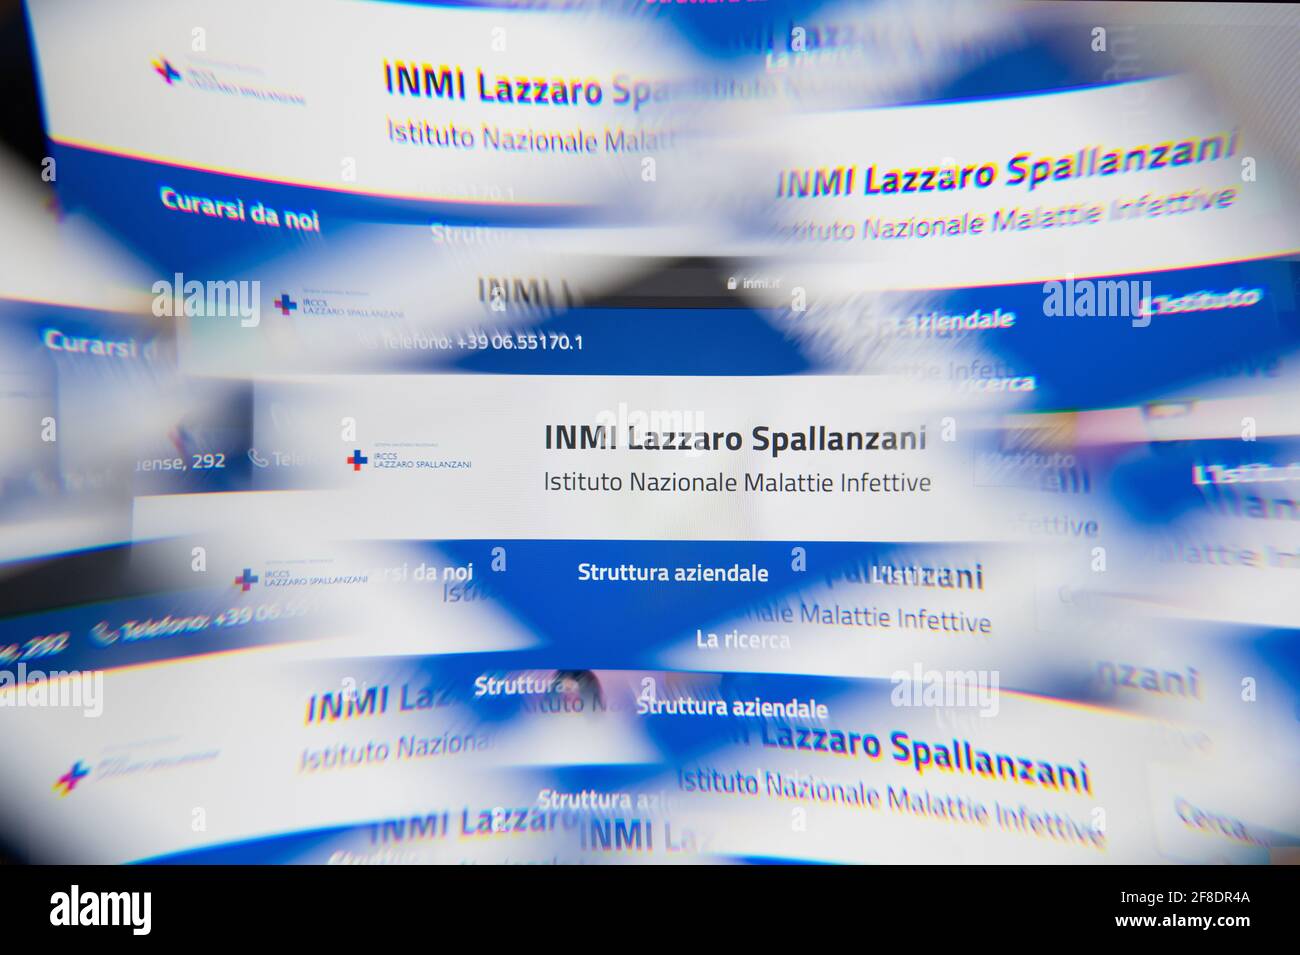 Milan, Italy - APRIL 10, 2021: ospedale spallanzani logo on laptop screen seen through an optical prism. Illustrative editorial image from ospedale sp Stock Photo